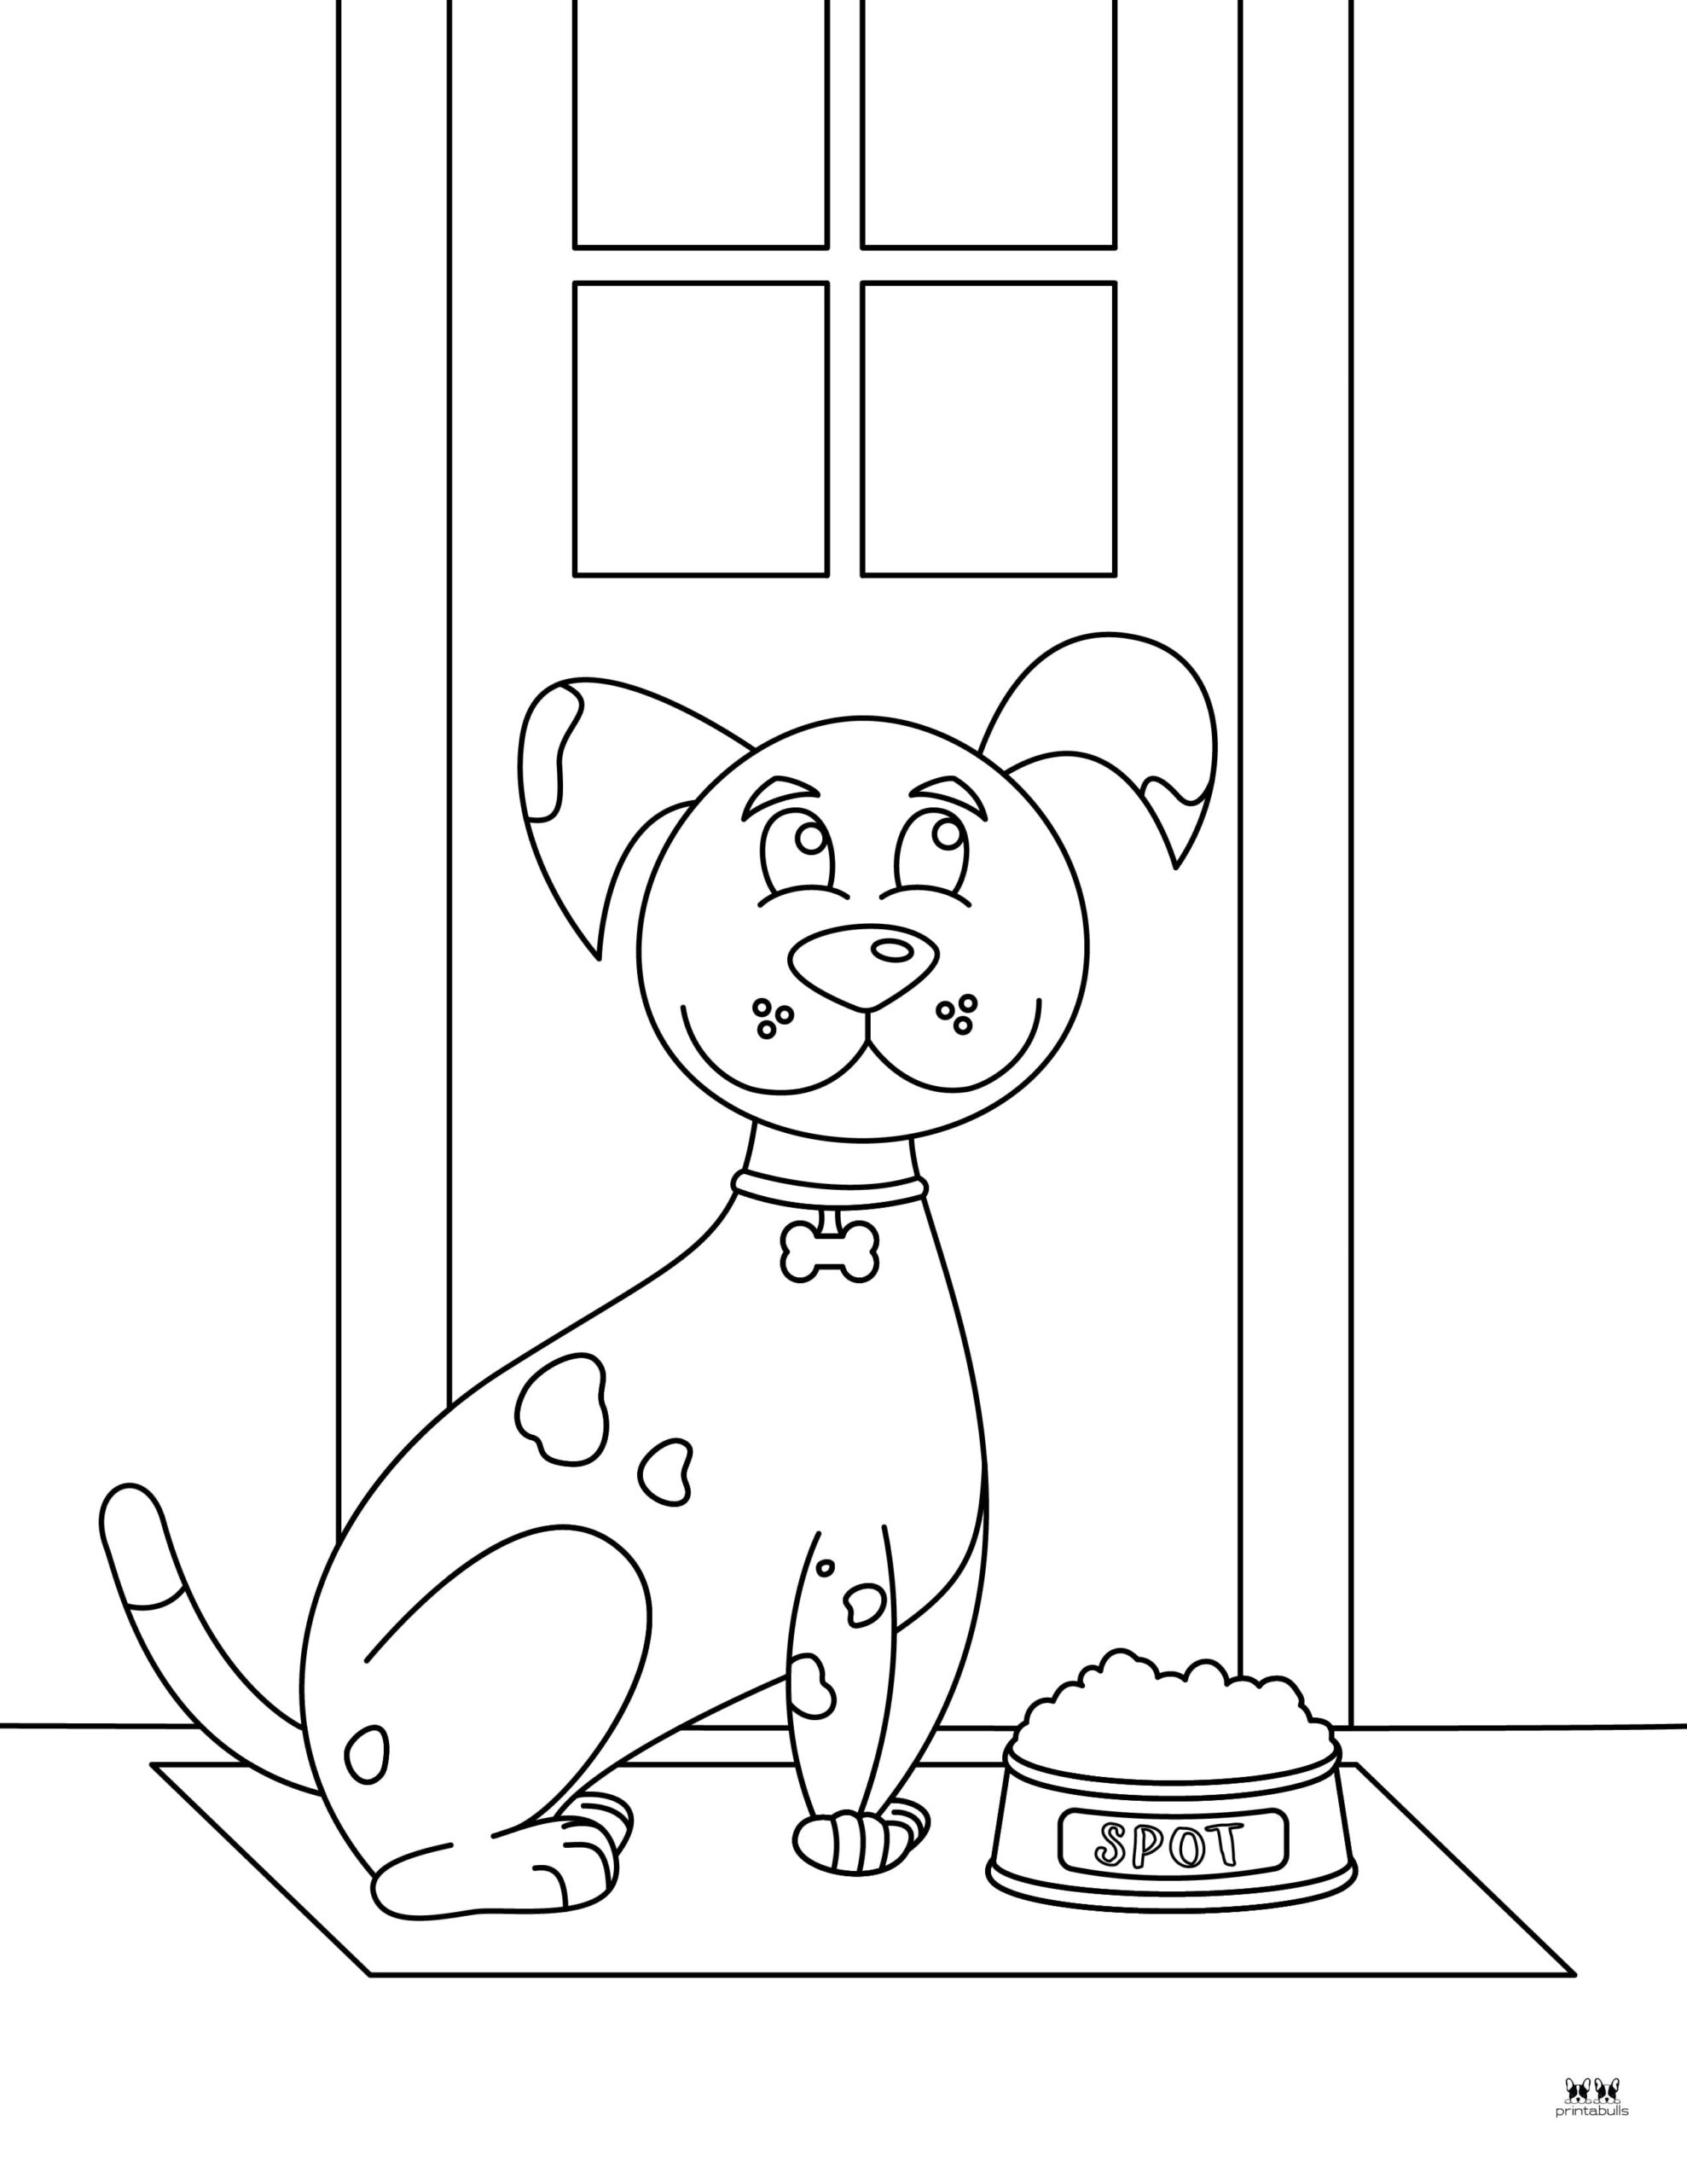 Dog Coloring Pages - 25 FREE Printable Pages | Printabulls